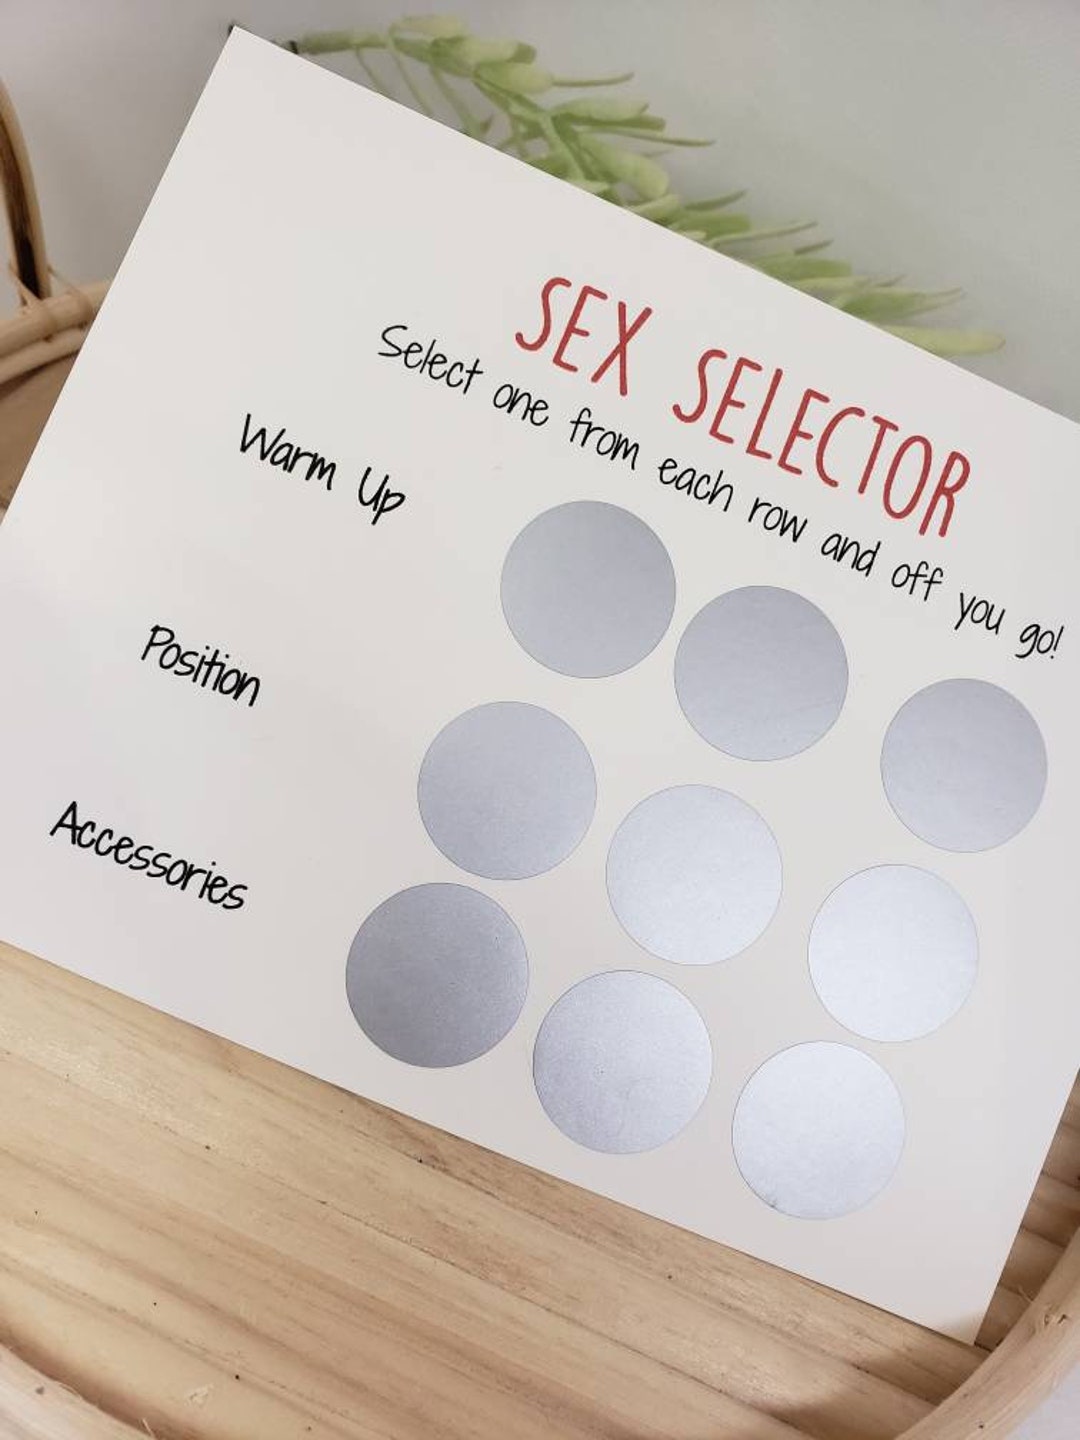 Sex Selector Naughty Scratcher Gift for Husband Boyfriend pic